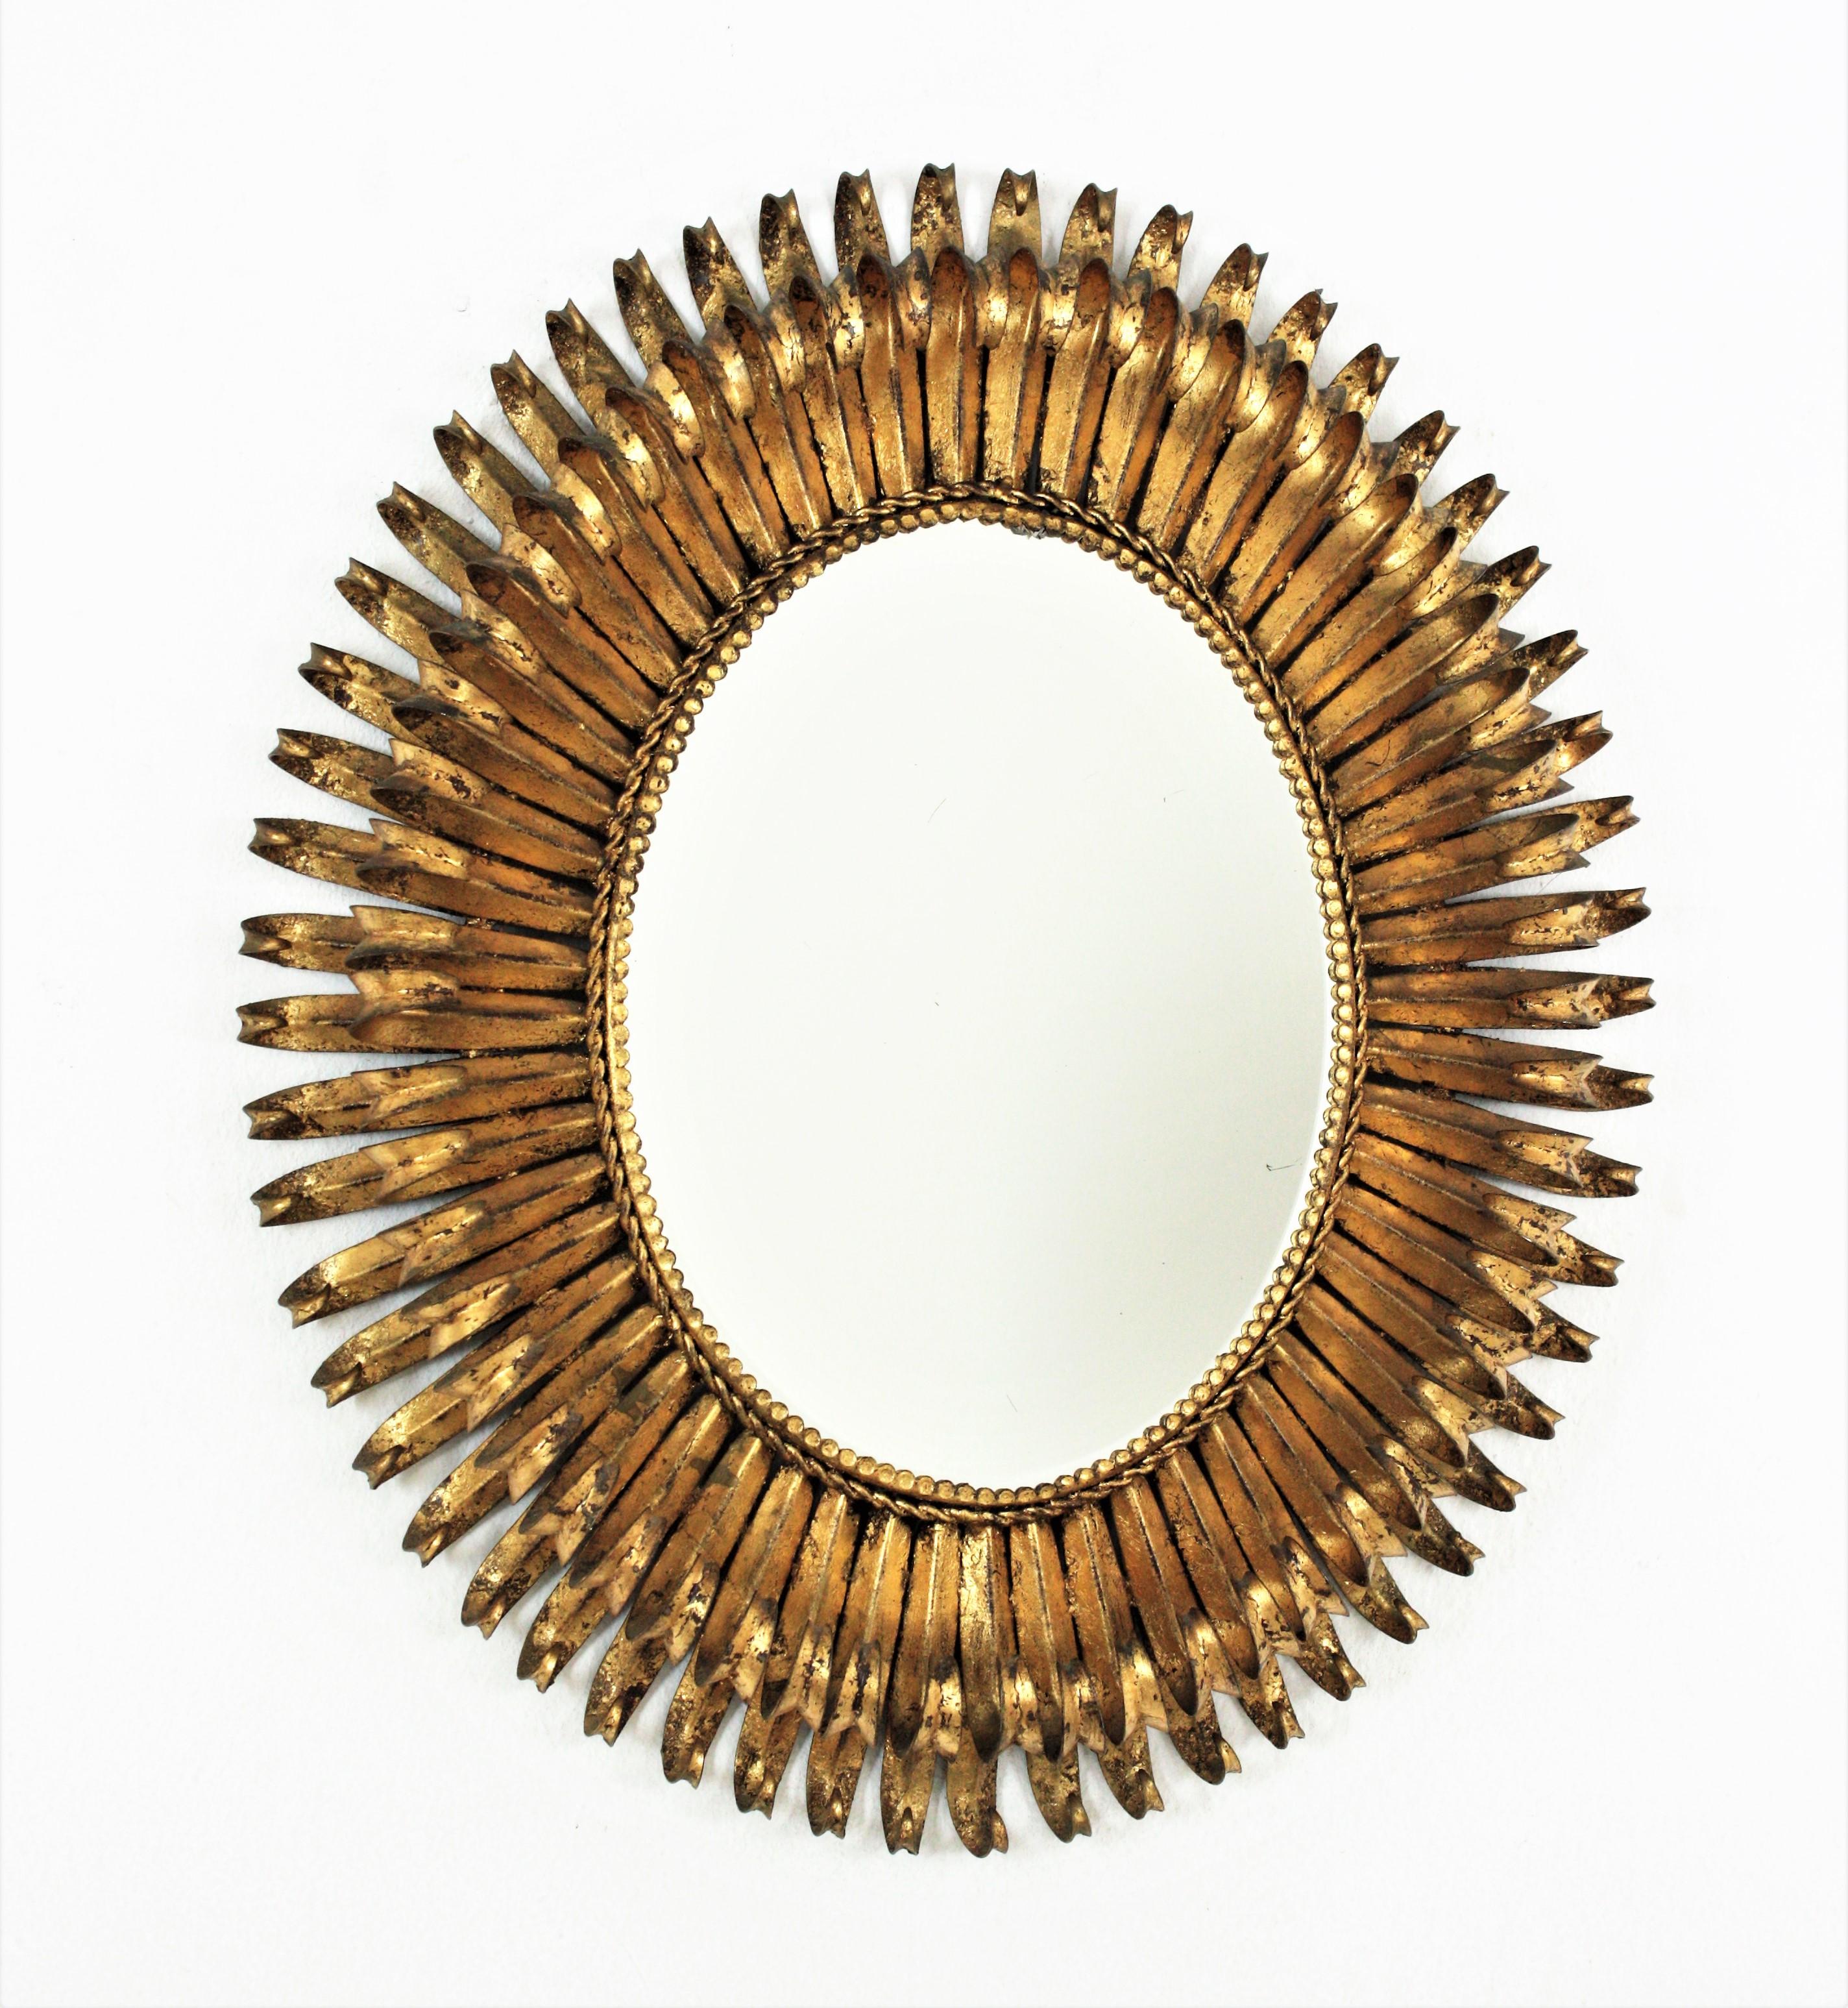 Eye-catching double layered eyelash gilt iron sunburst mirror, France, 1950s
The frame is entirely made by hand with a double layer of hand-forged iron curved beams in eyelash shape.
It will be a nice midcentury brutalist addition wherever you